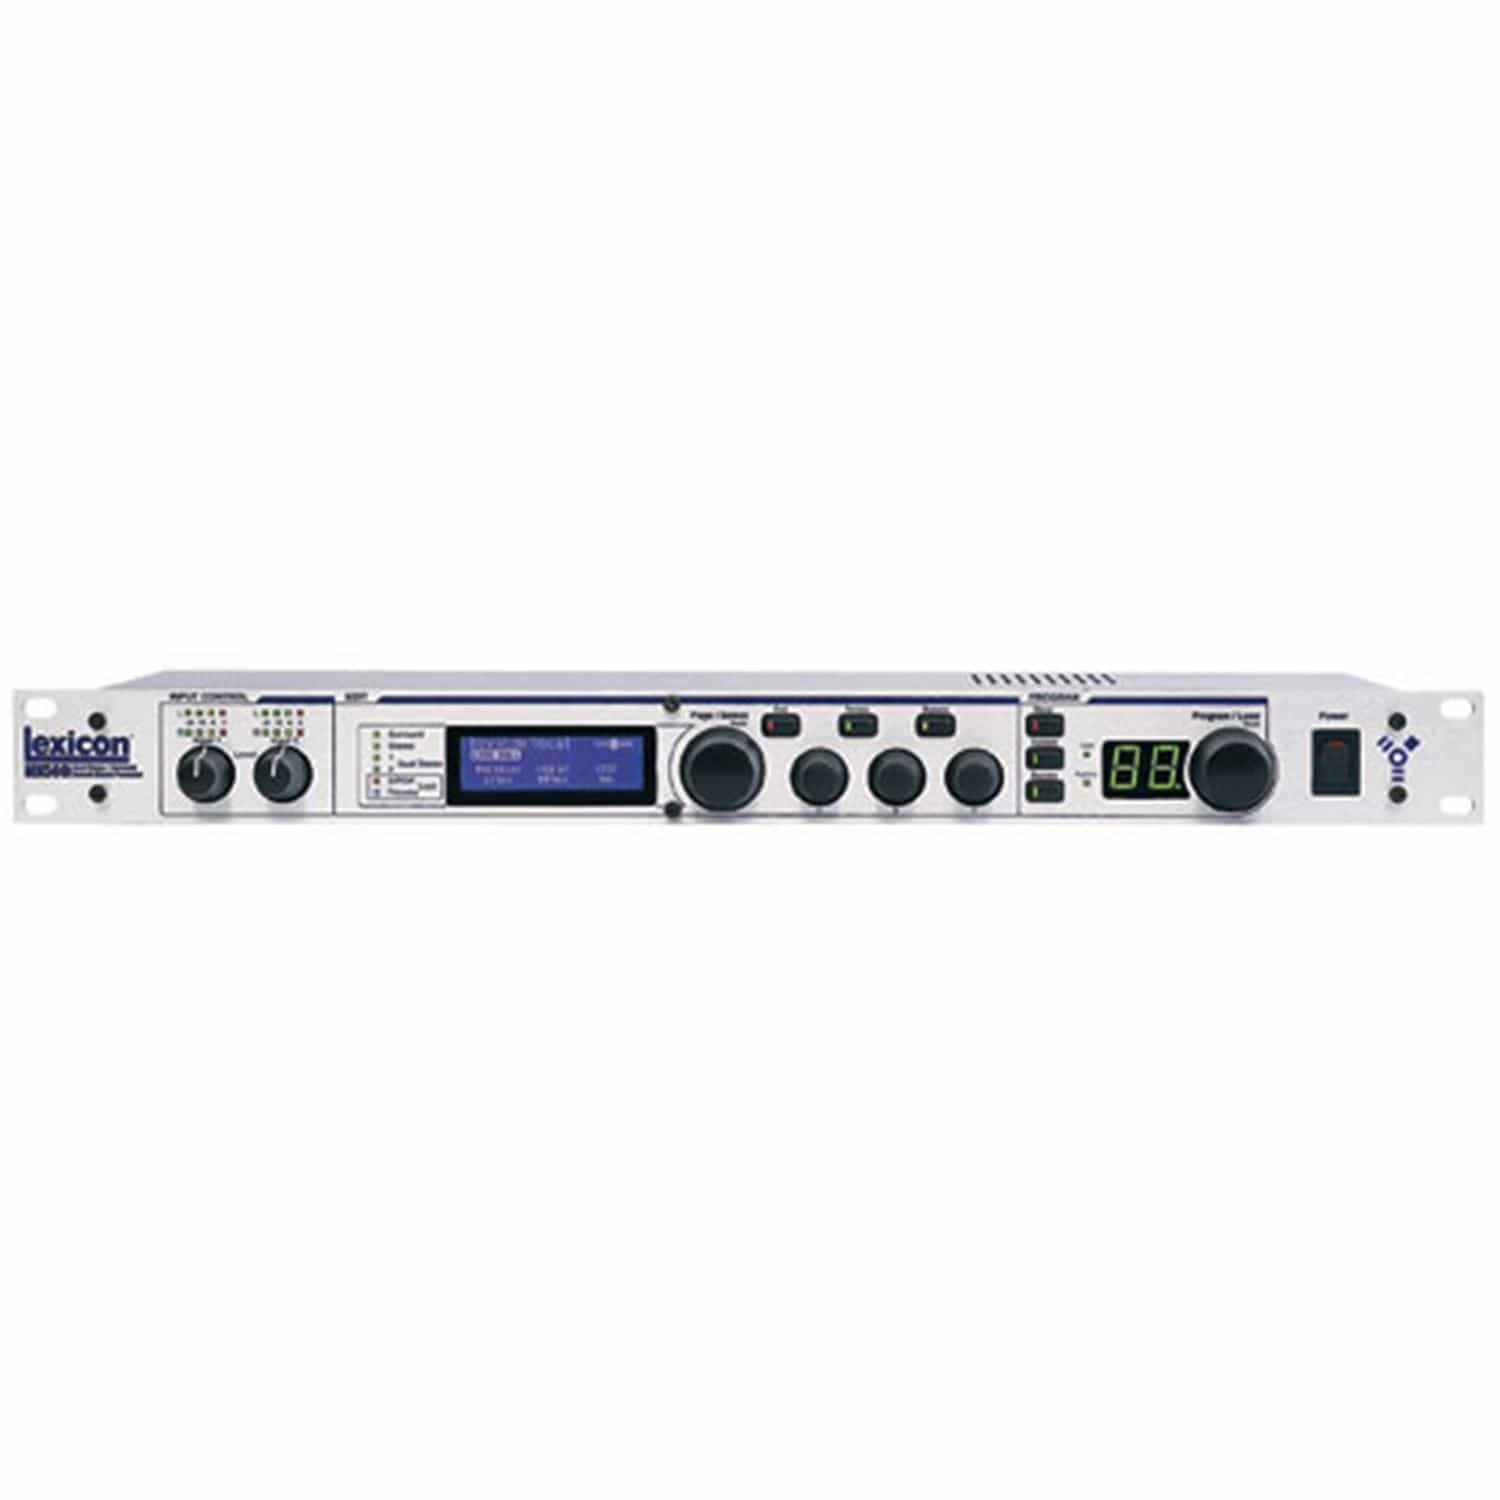 Lexicon MX-500 Multieffects Processor with Firewire - PSSL ProSound and Stage Lighting